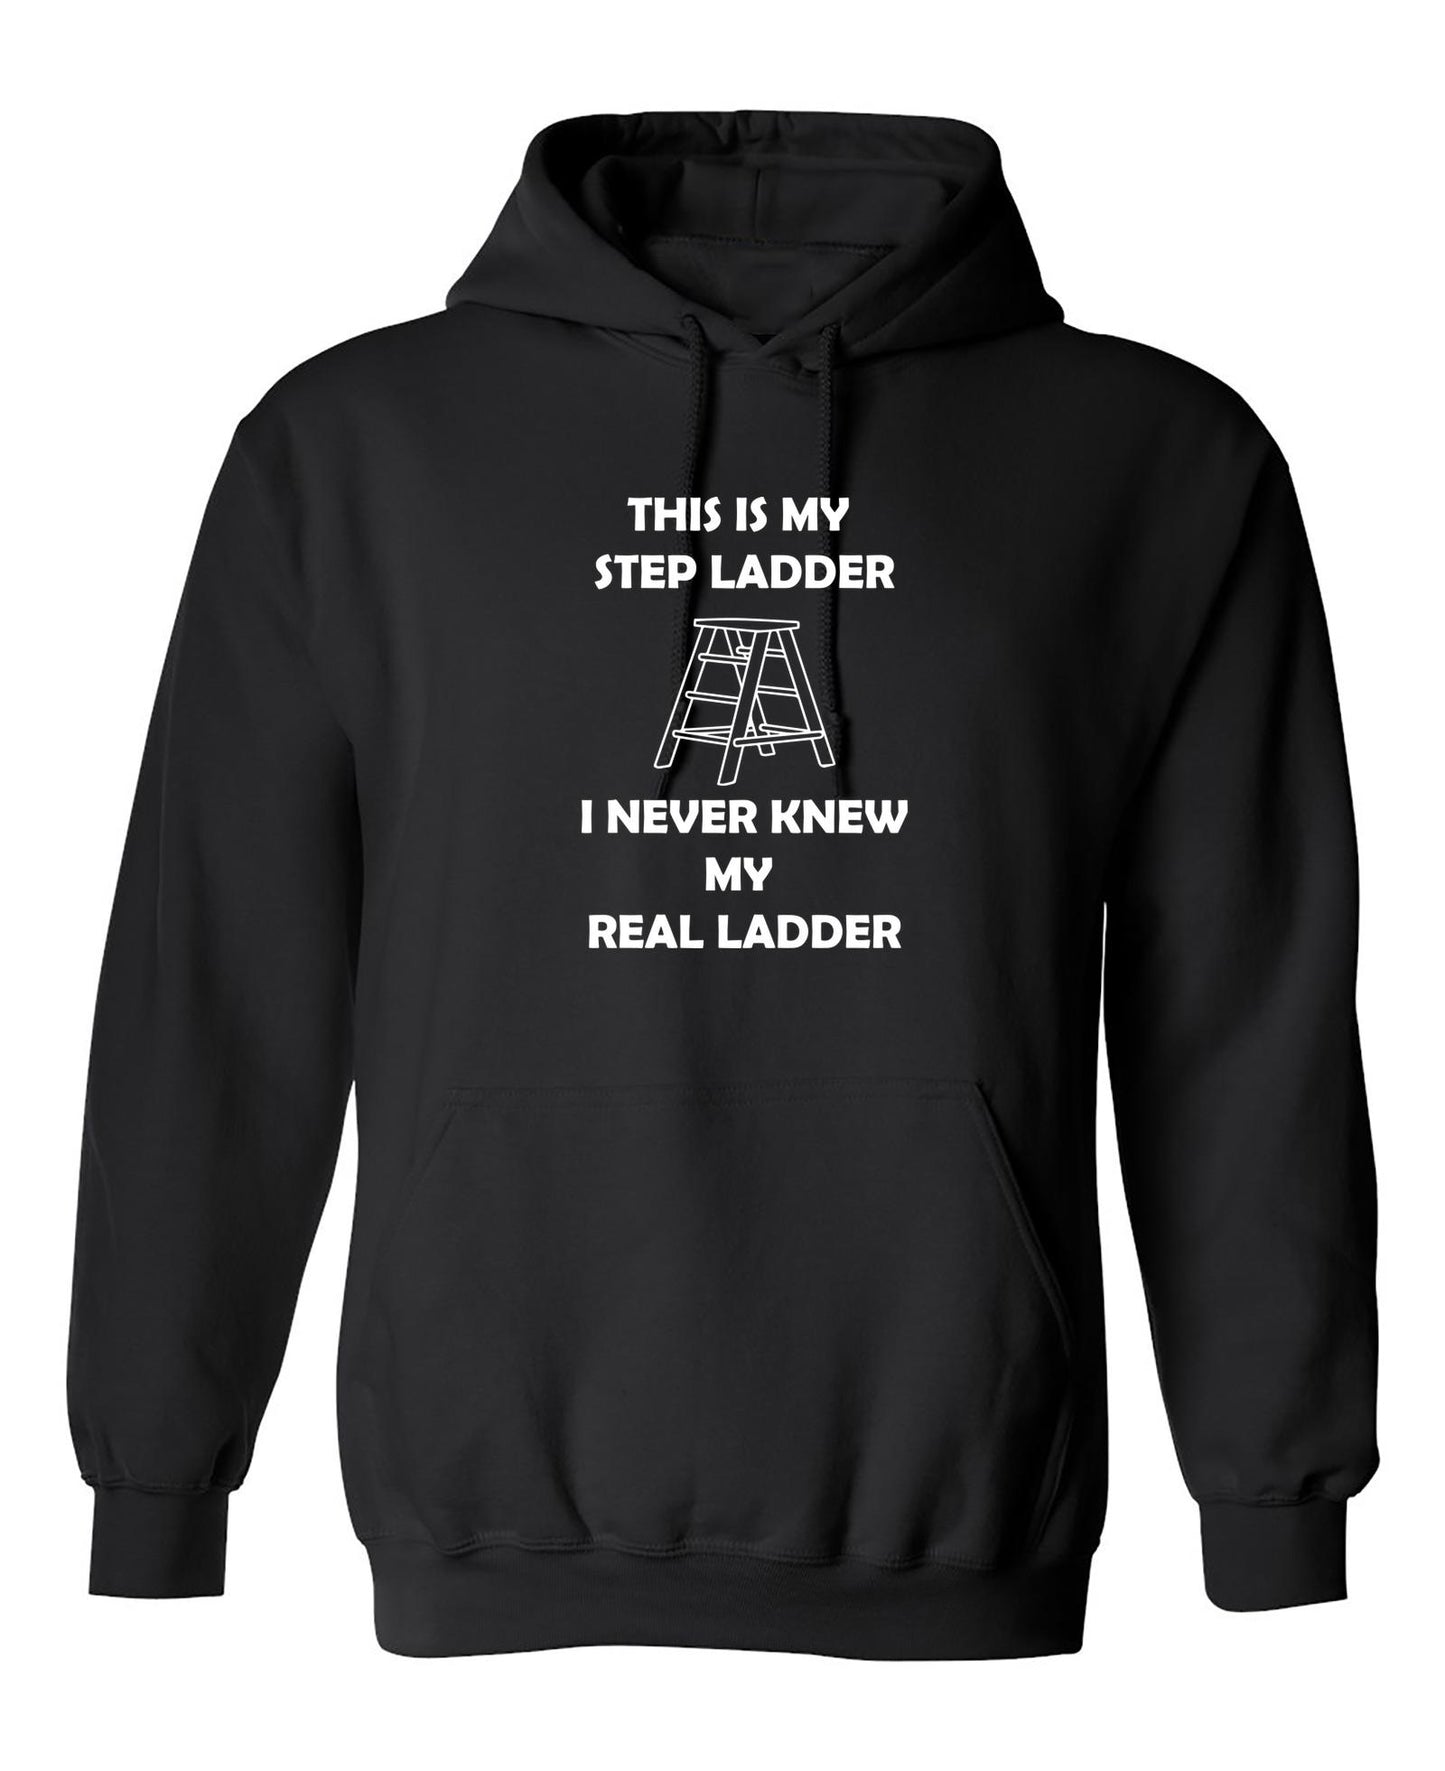 Funny T-Shirts design "This Is My Step Ladder"